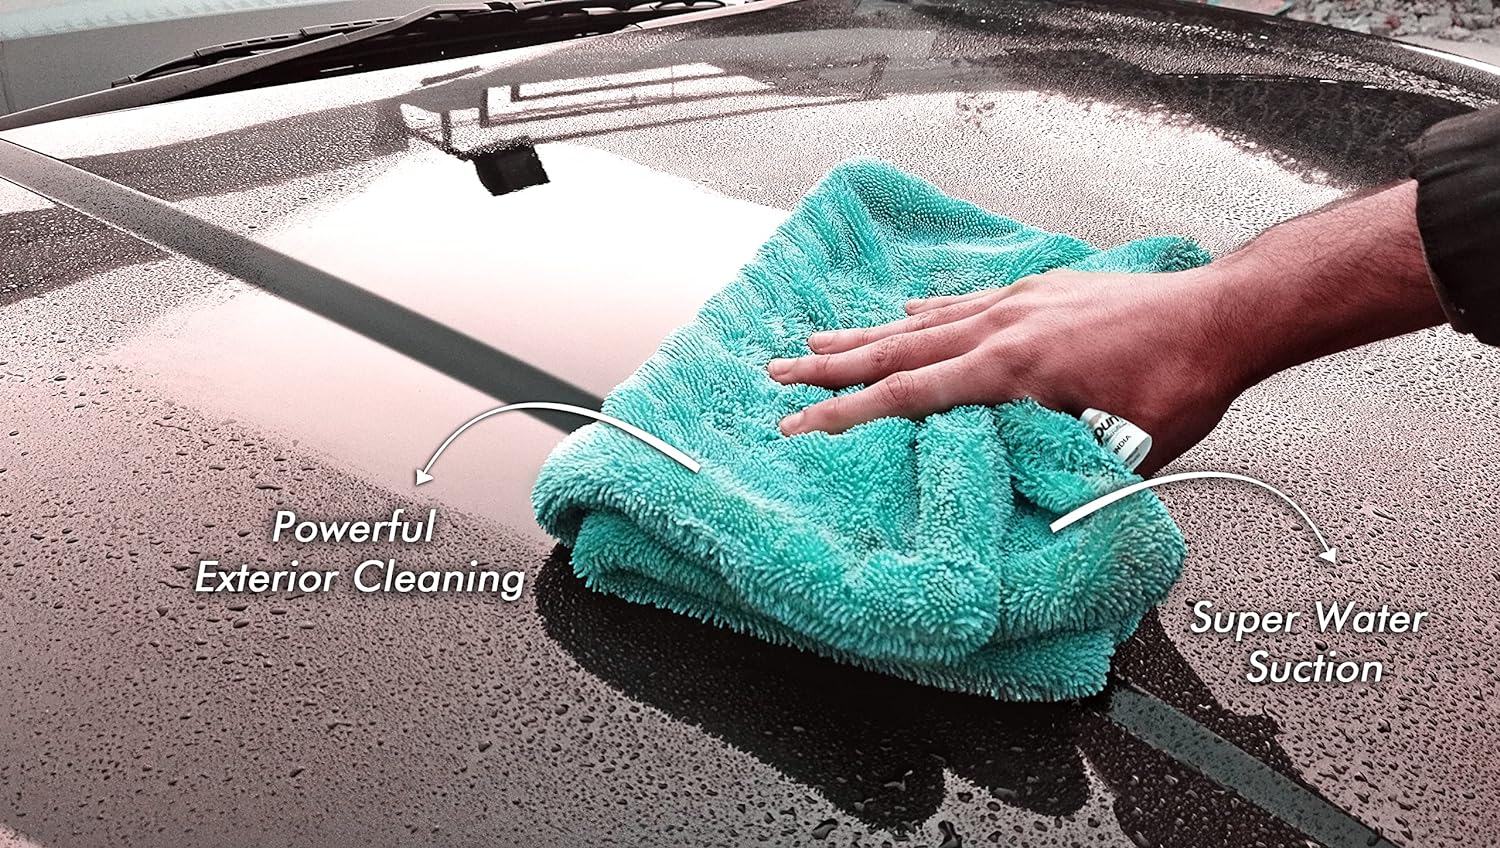 SOFTSPUN Microfiber Cloth for Car - 1200 GSM, 1Pcs, Twisted Loop Super Absorbent Towel - Plush Pile and Lint Free Cloth for Drying and Detailing.